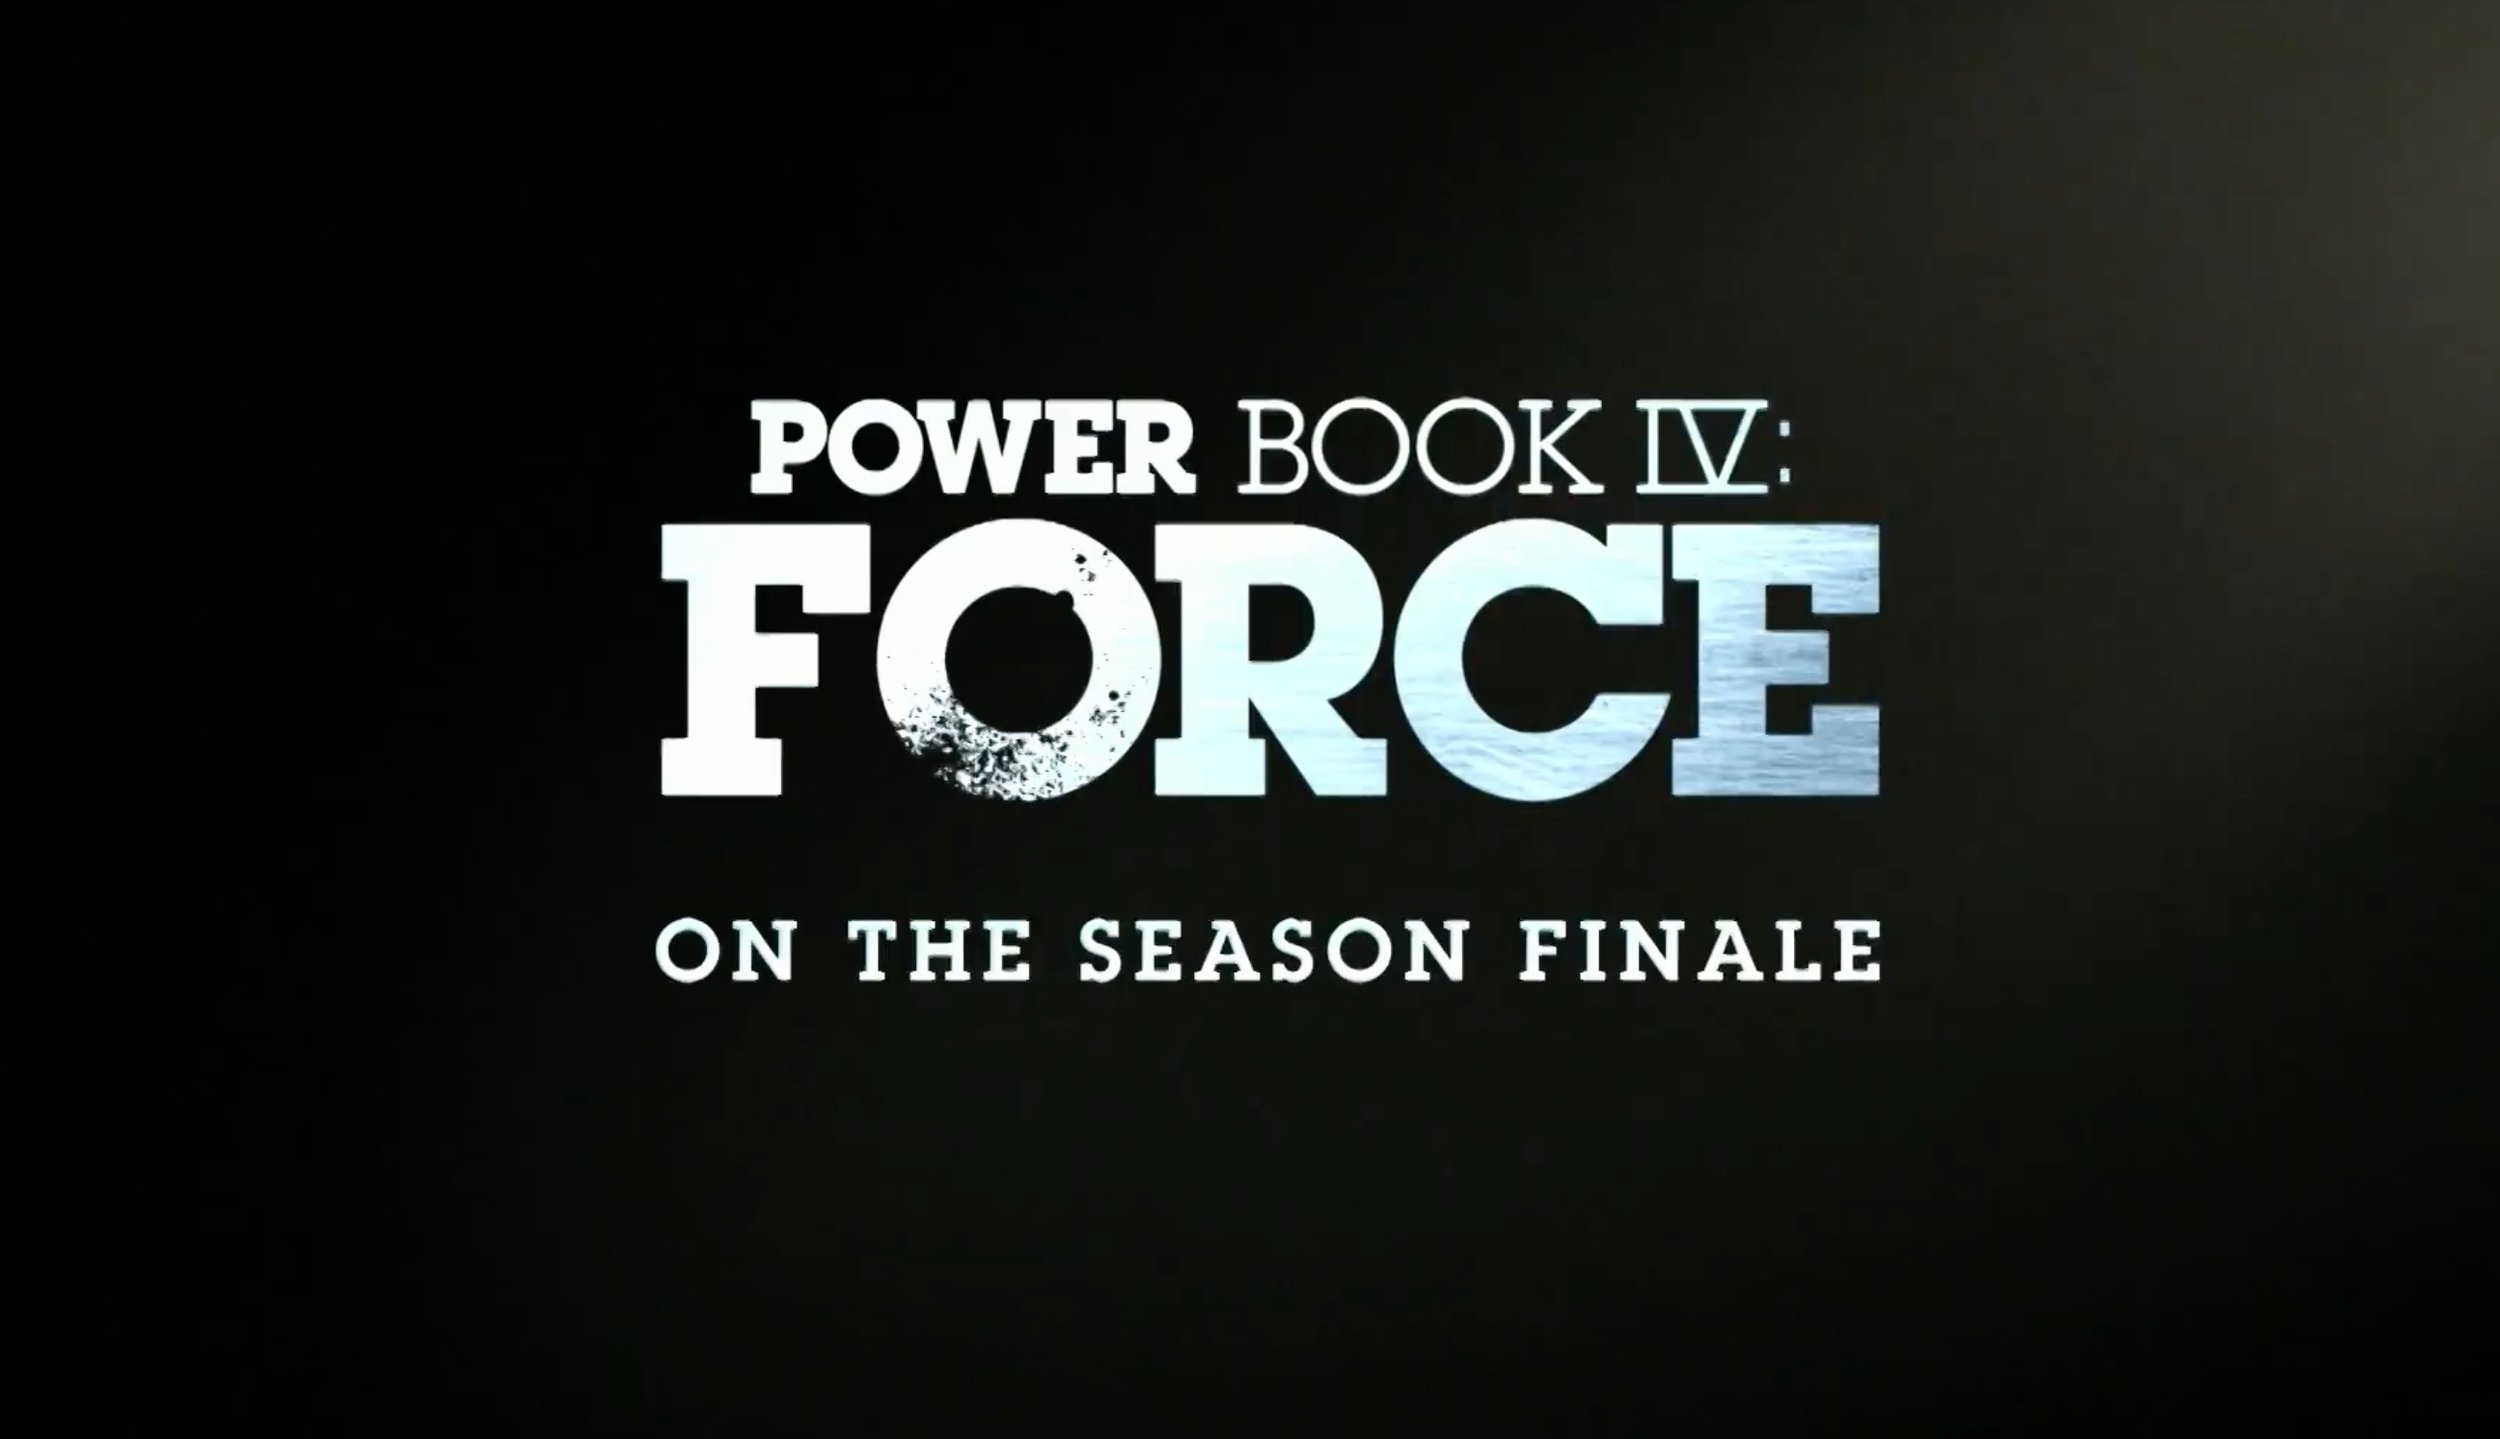 Power book 1. Power book IV: Force.